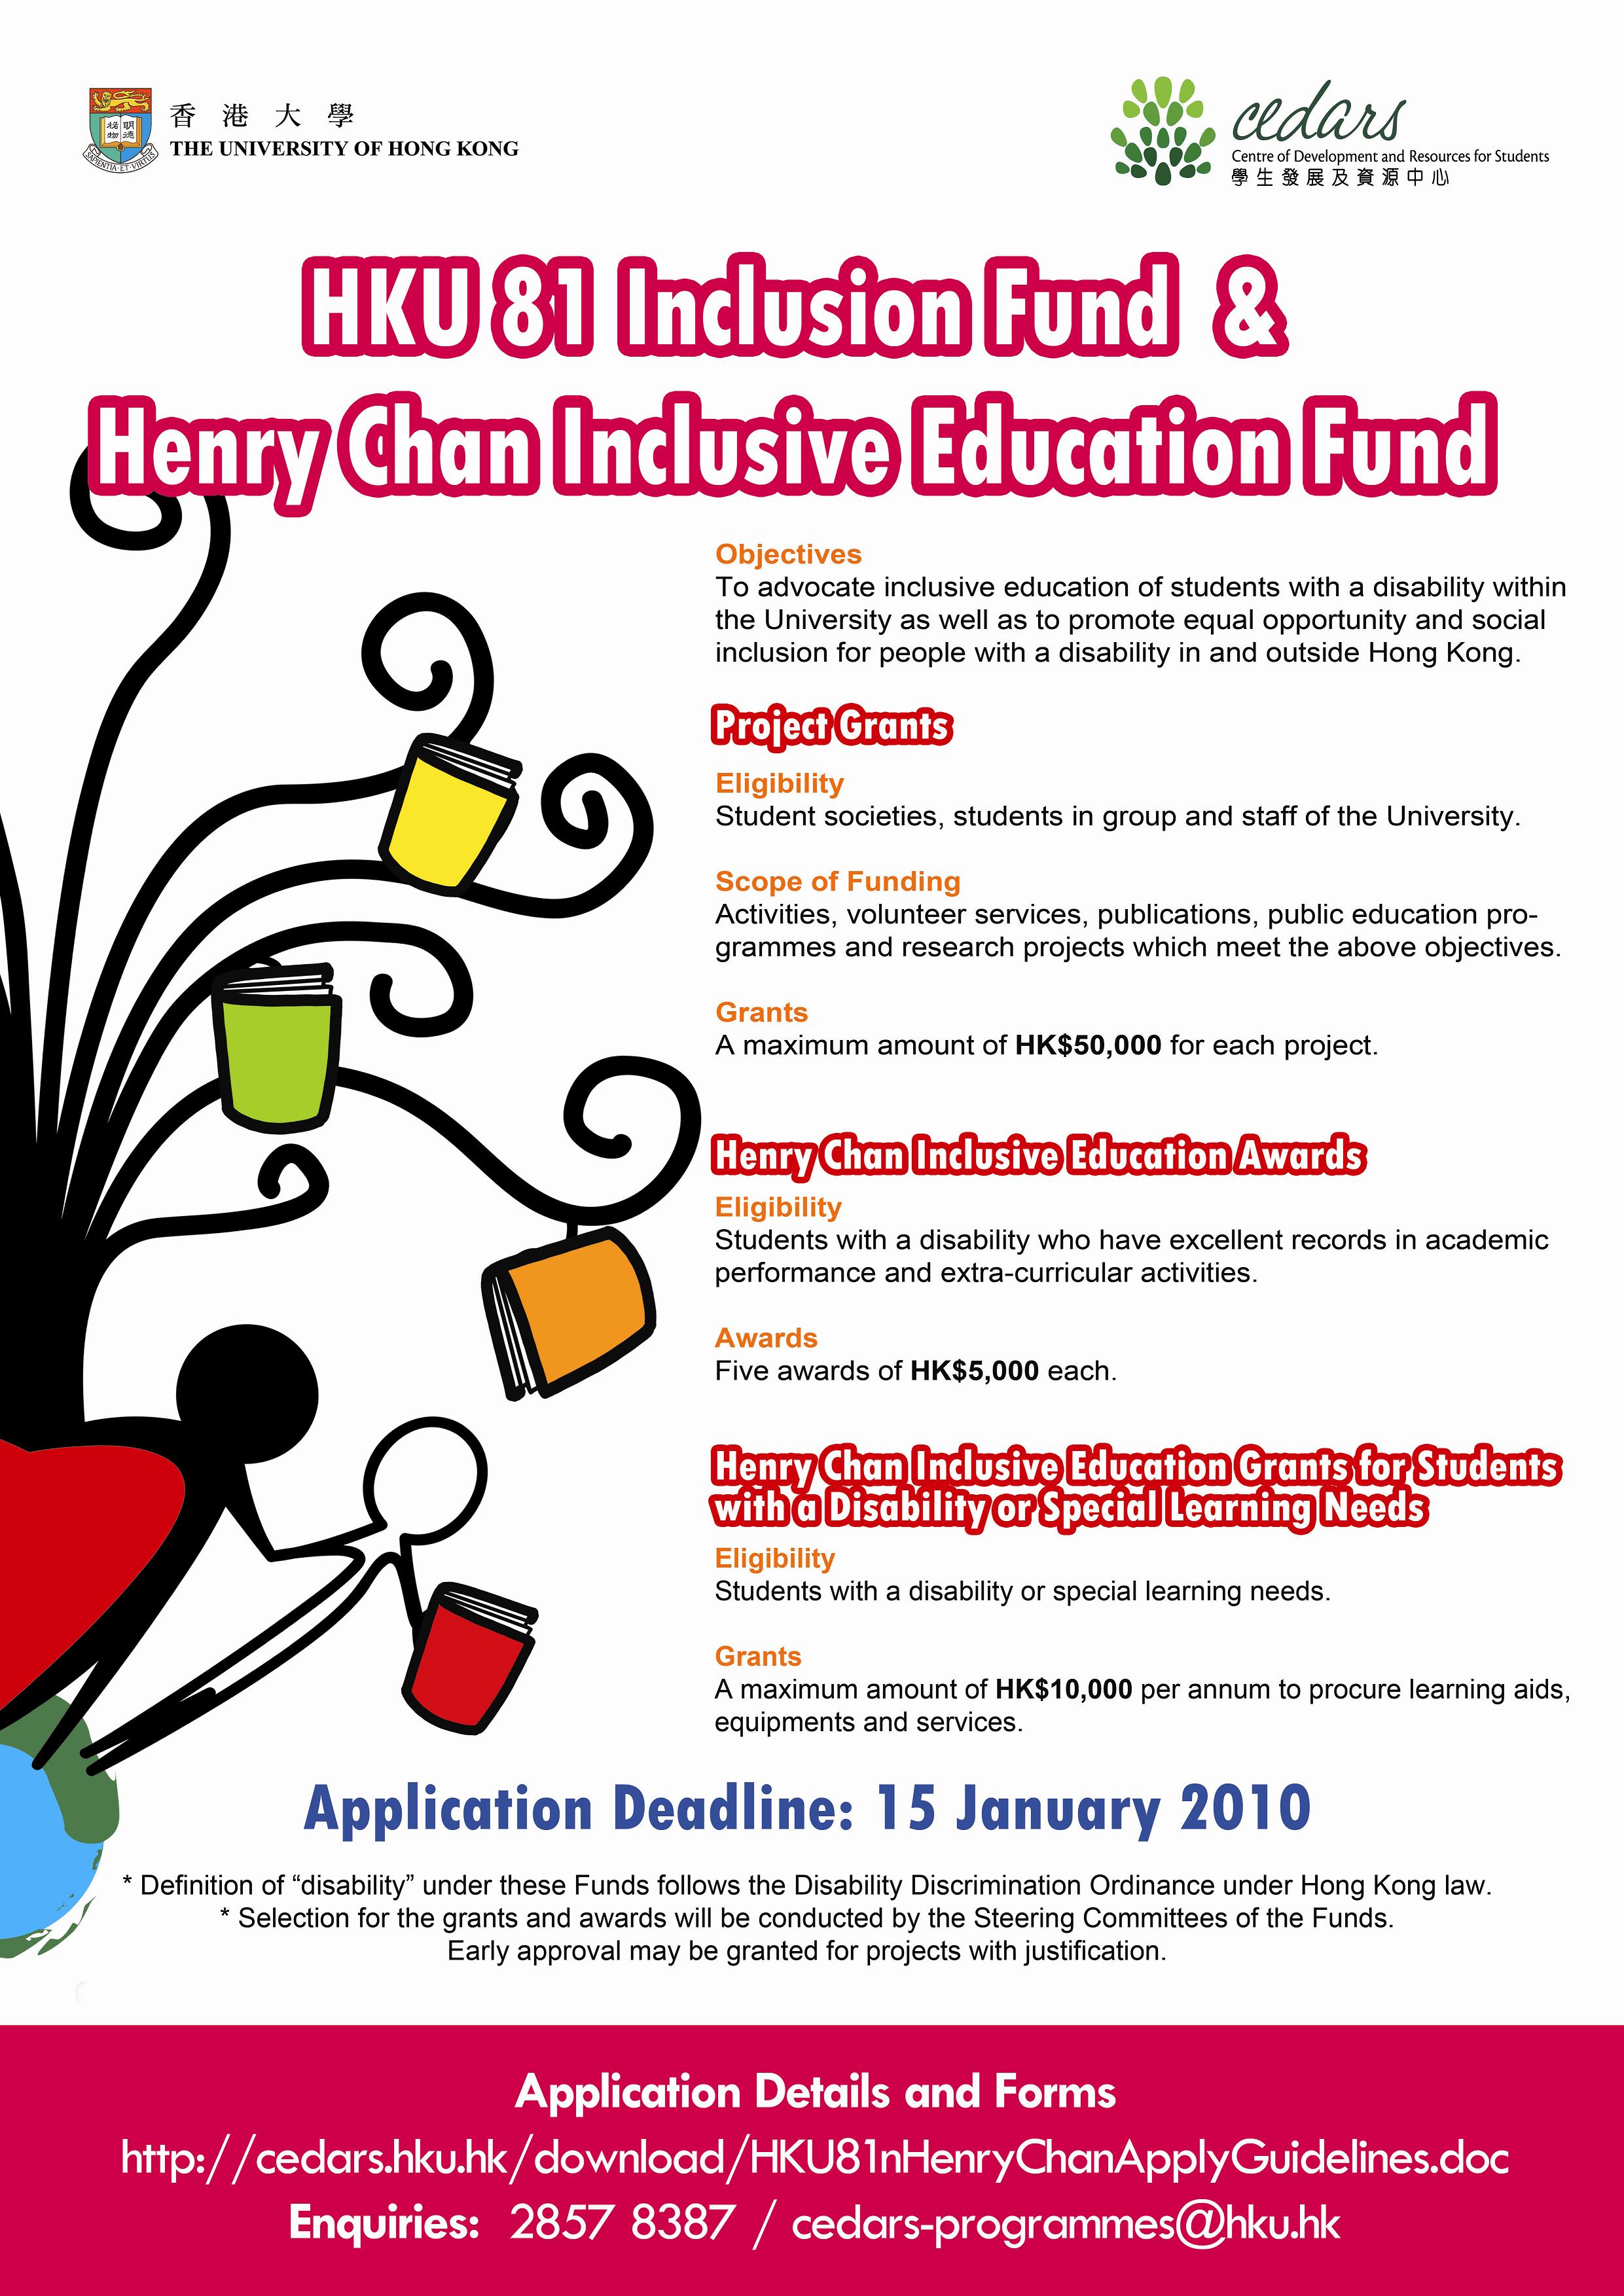 HKU 81 Inclusion Fund & Henry Chan Inclusive Education Fund 